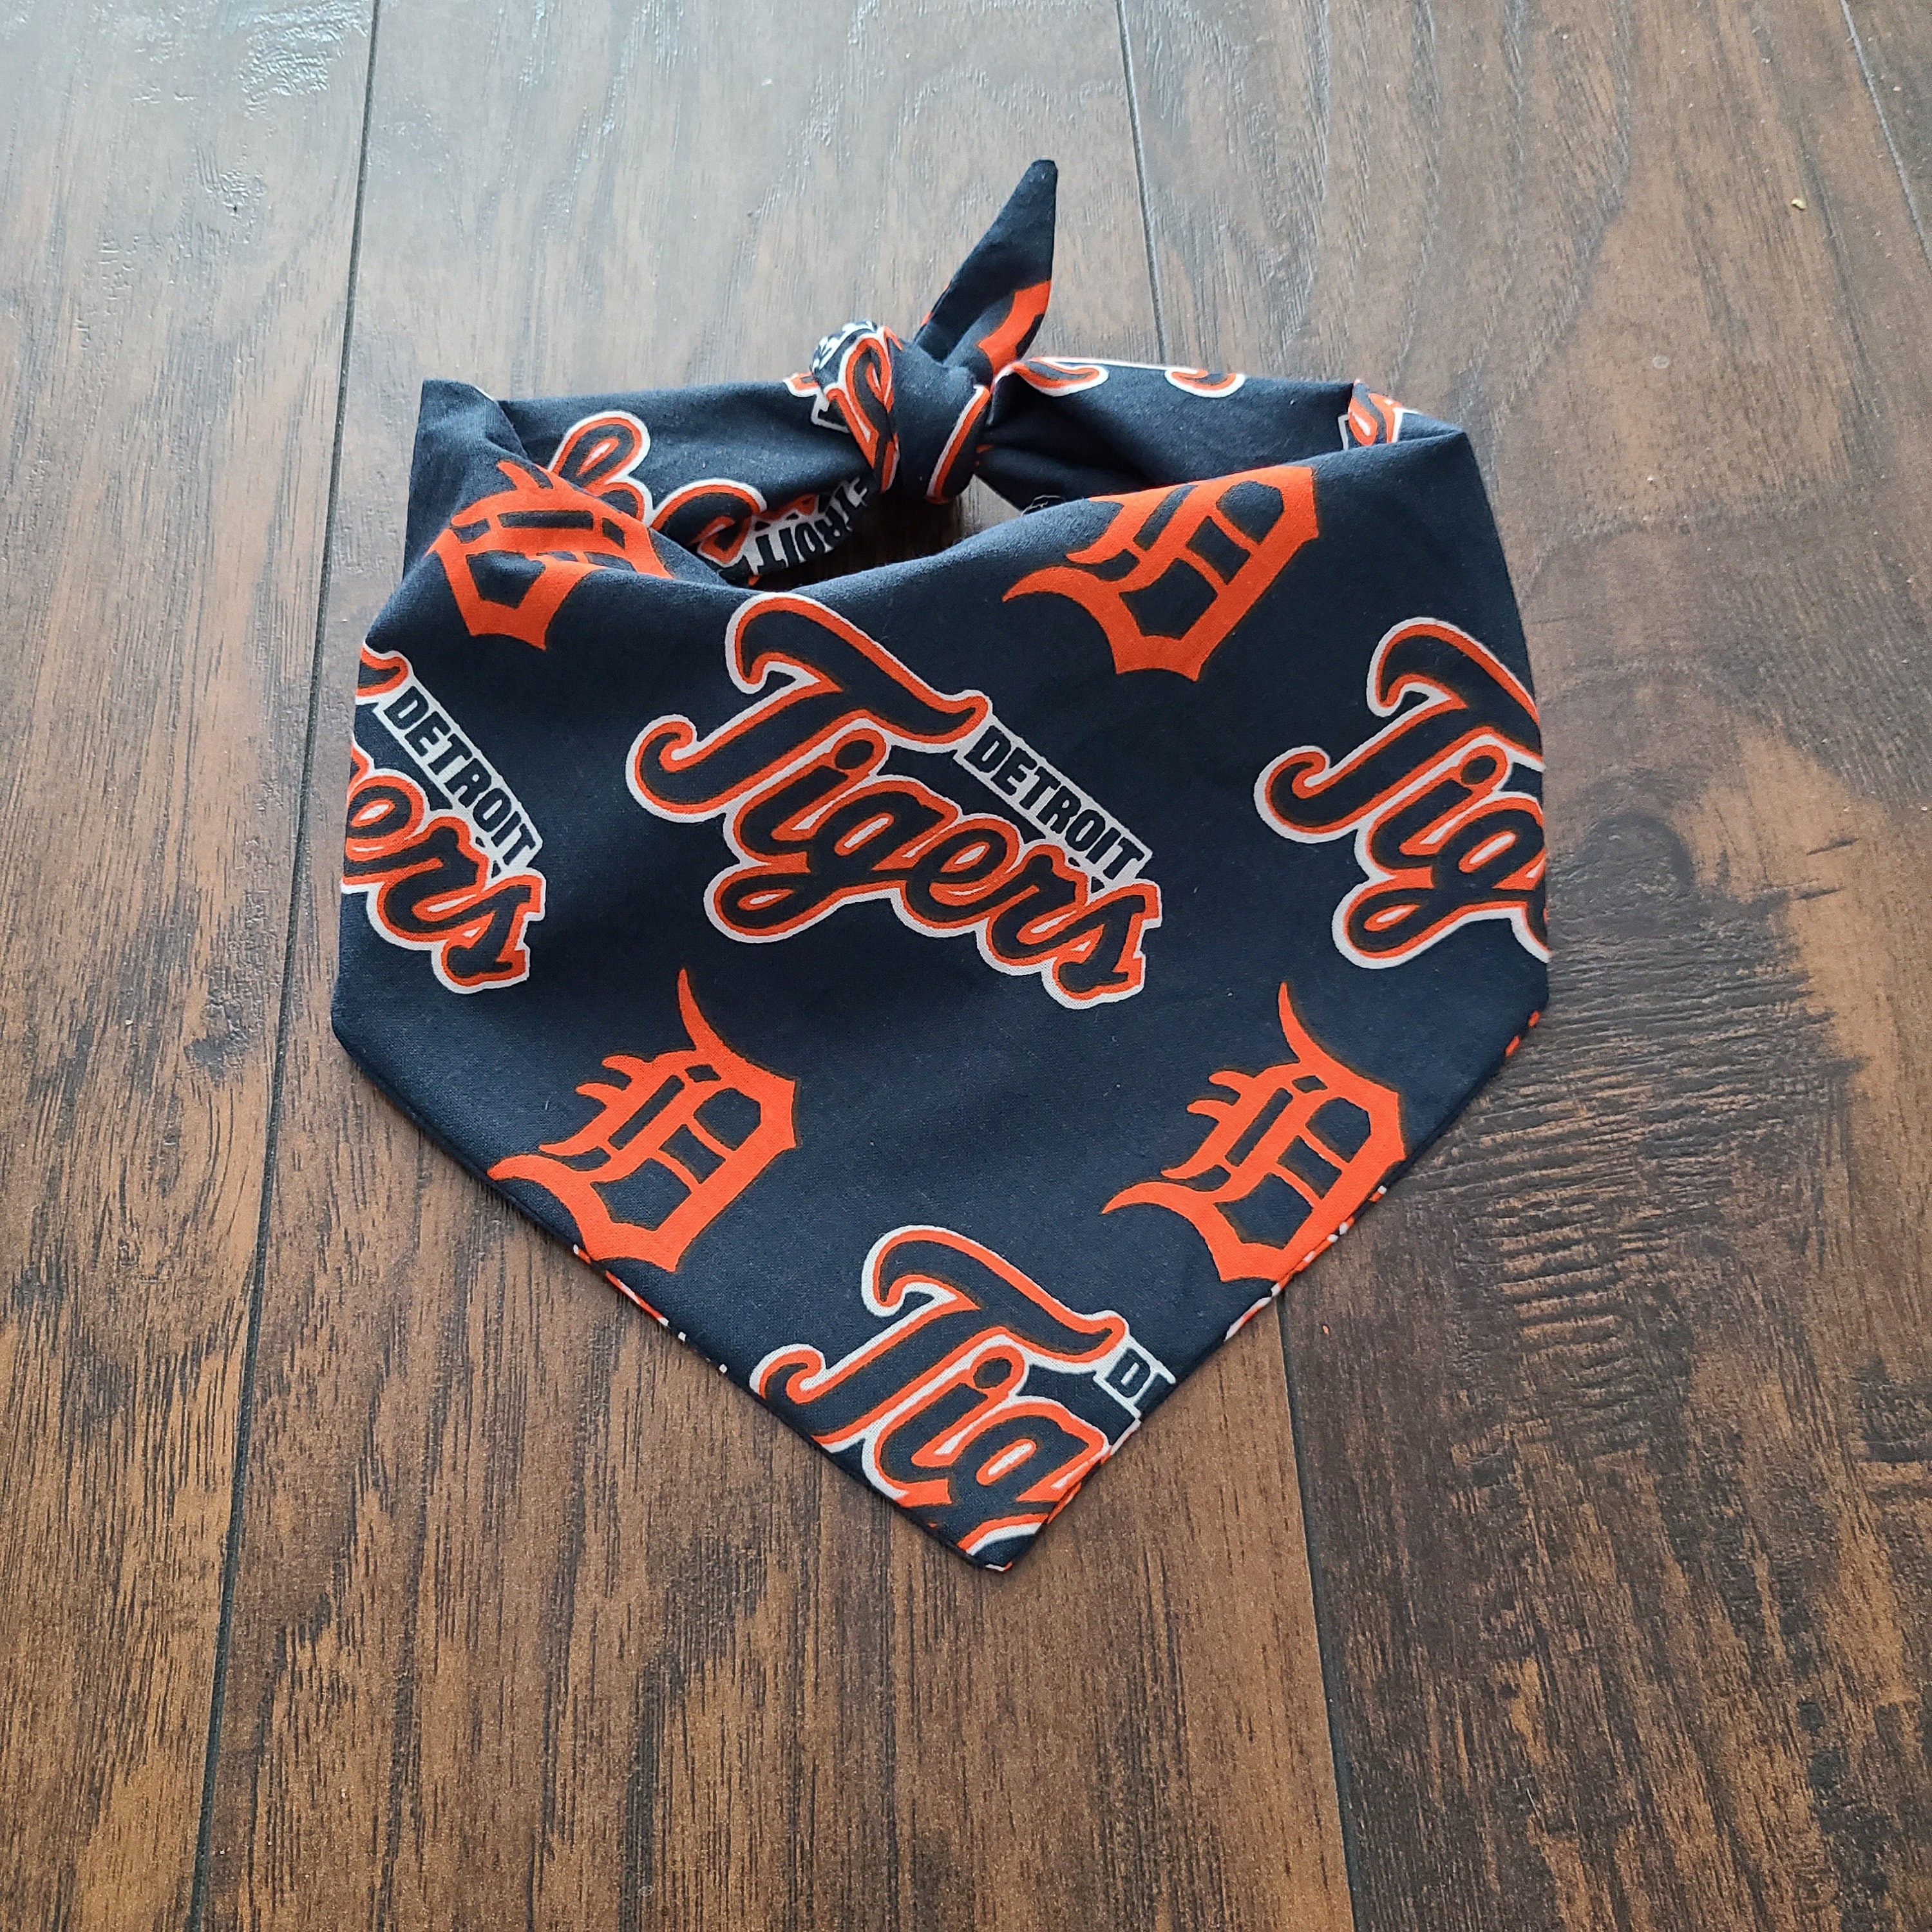 Detroit Tigers Dog Jersey - Small